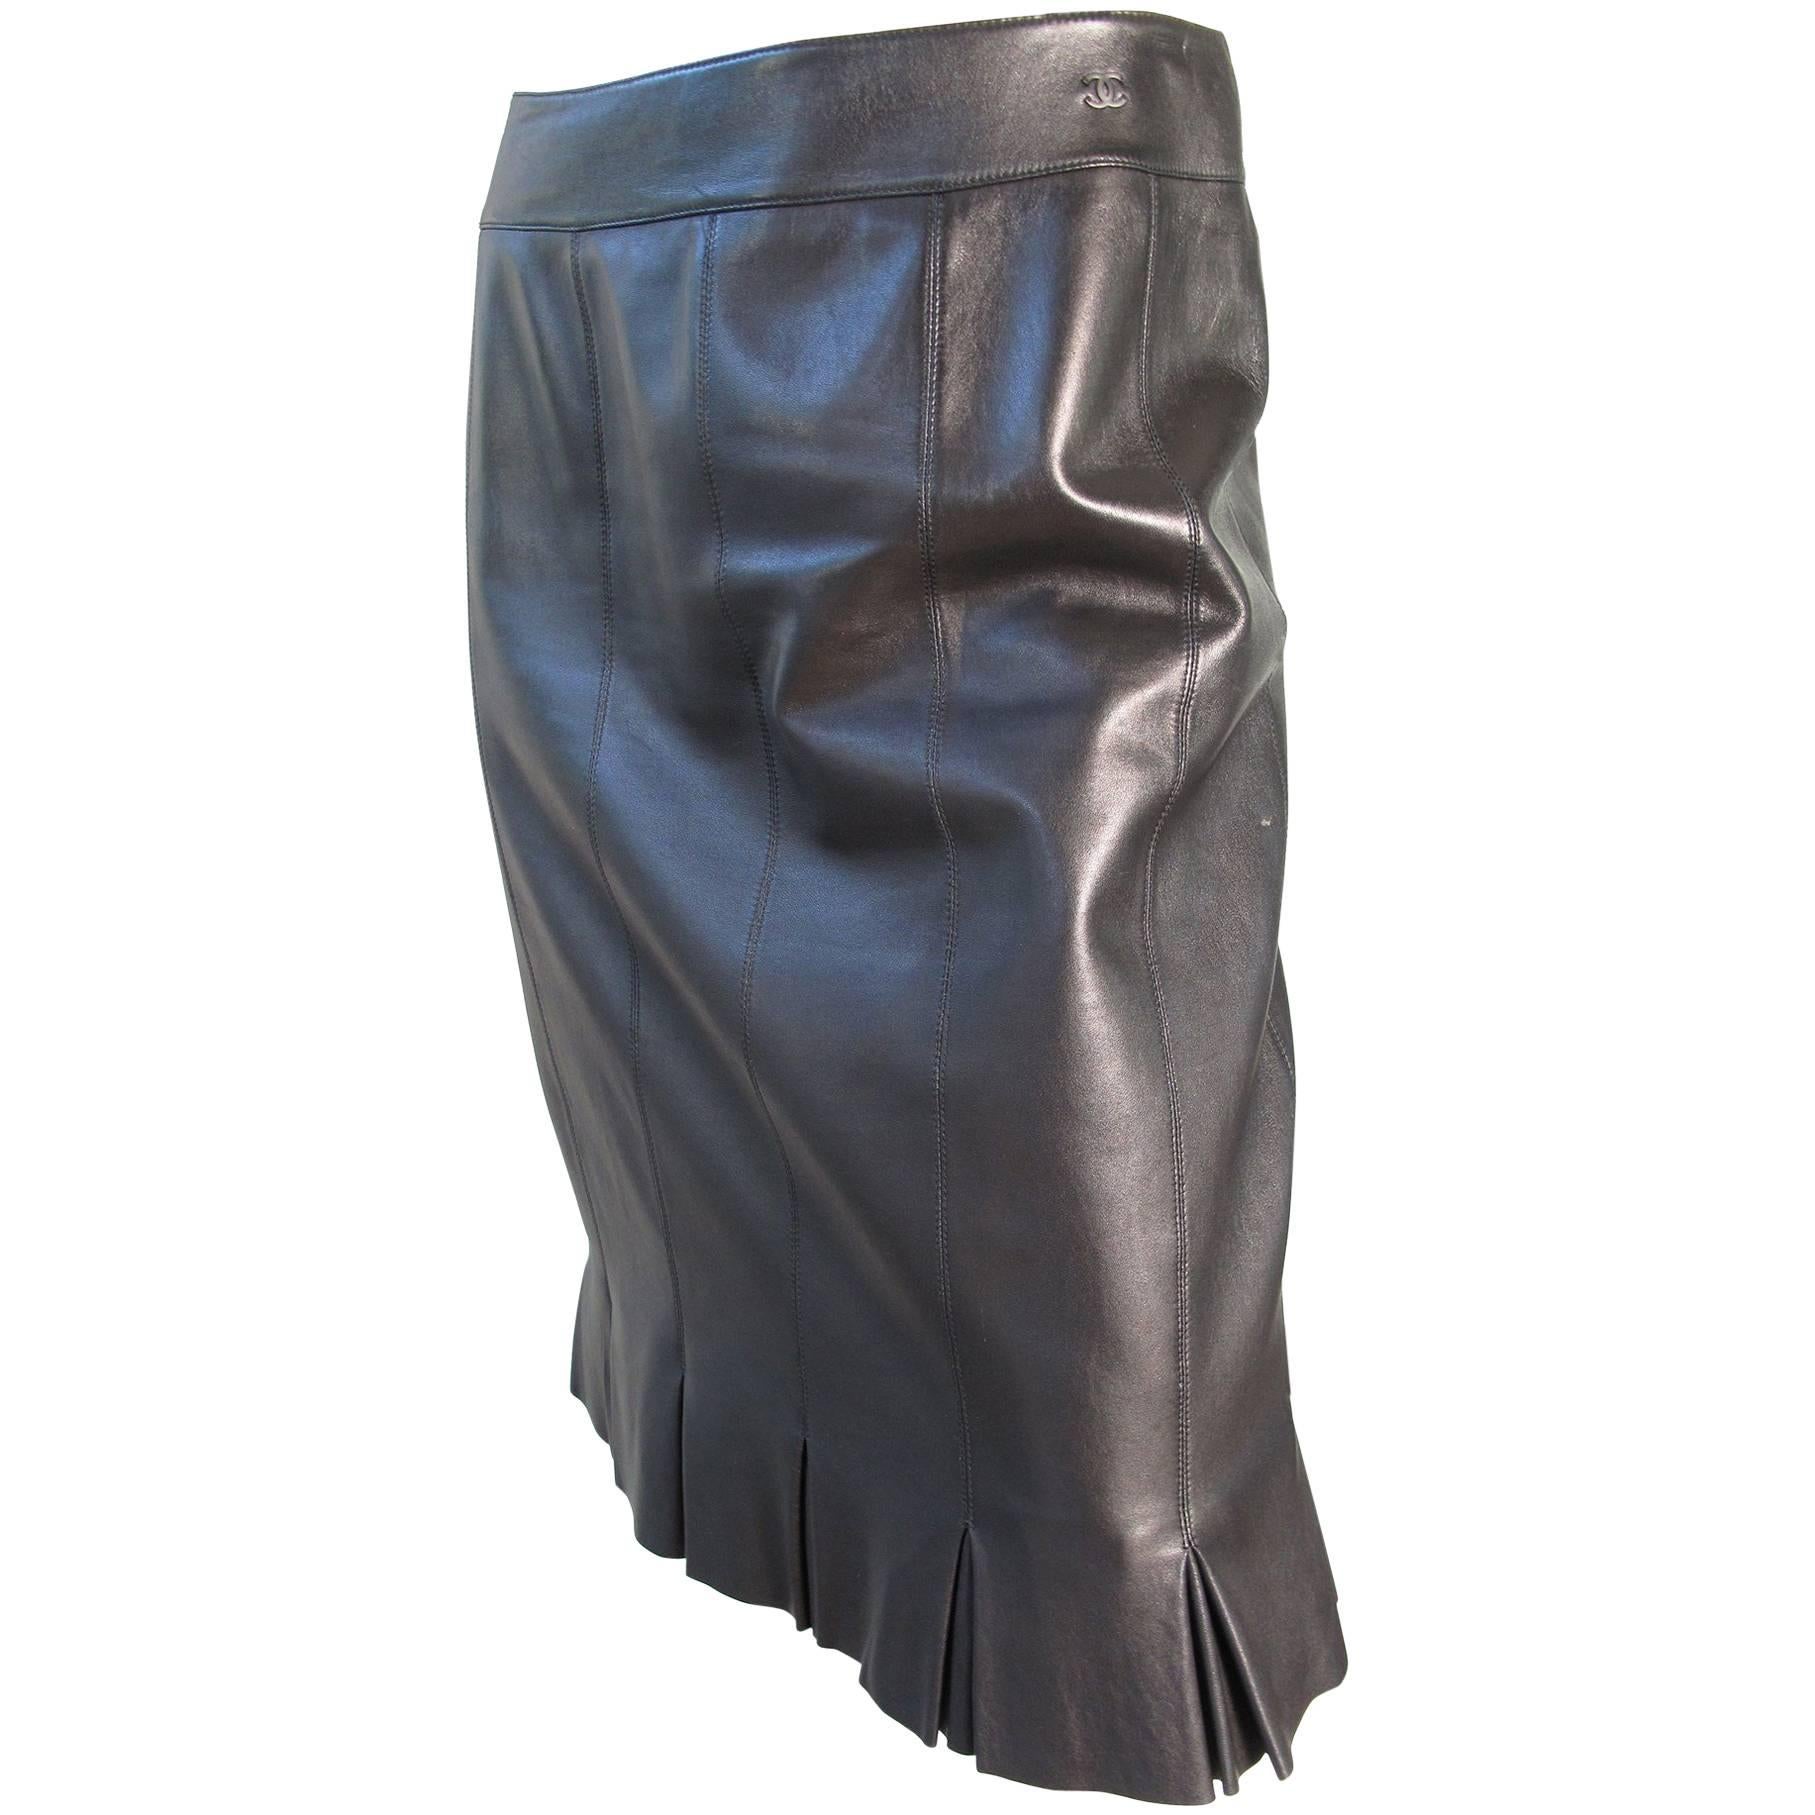 Chanel Karl Lagerfeld Black Leather Skirt with Pleated Hem